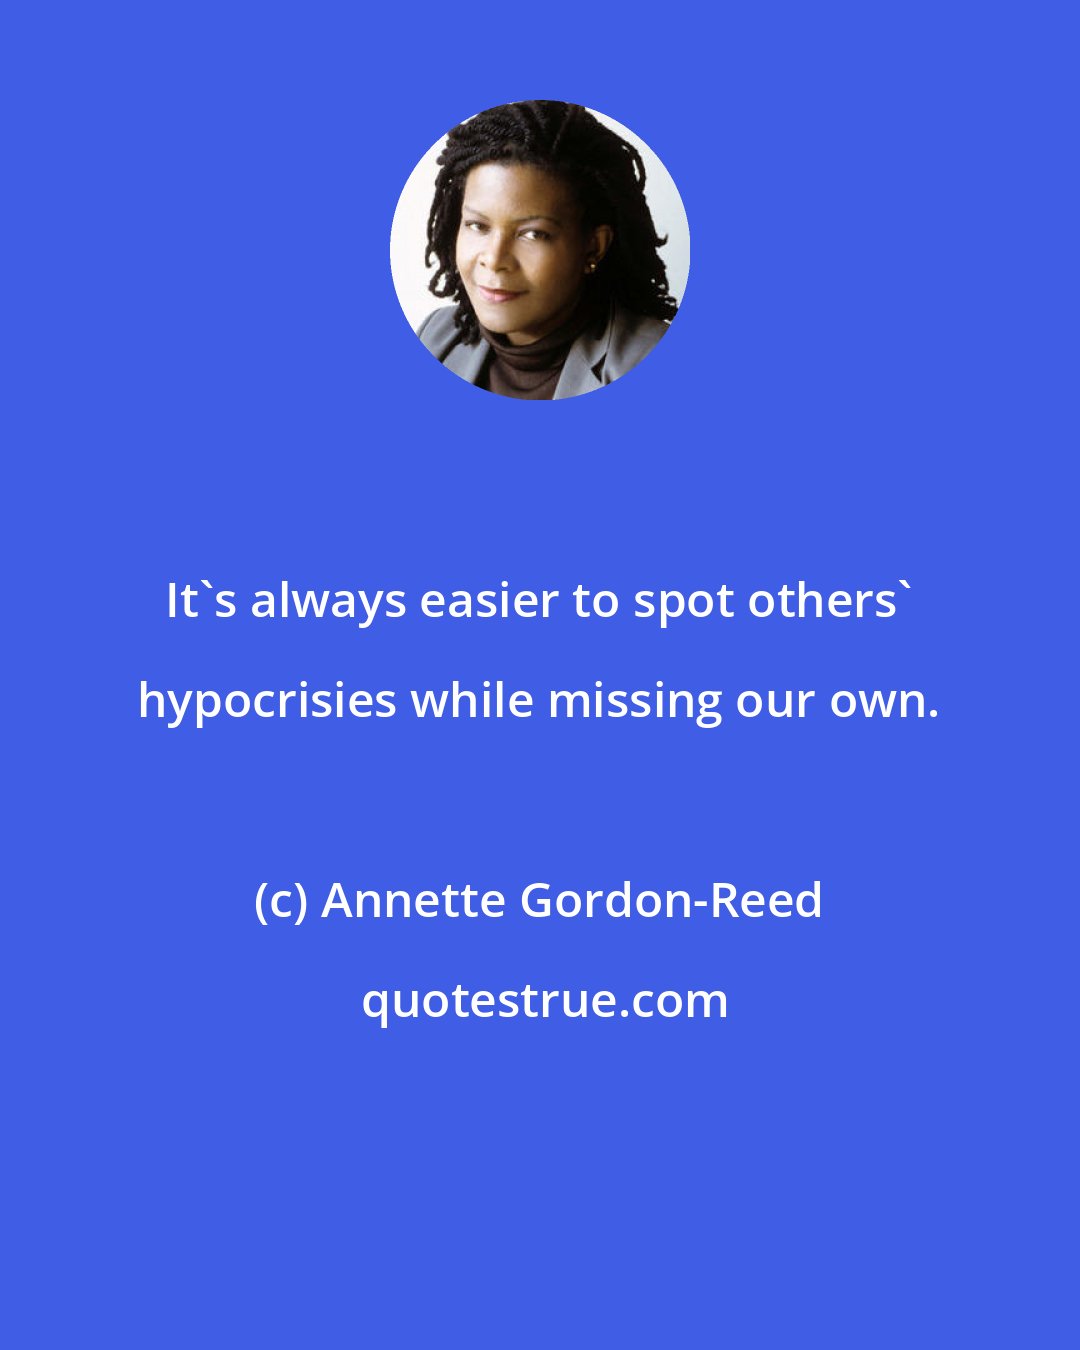 Annette Gordon-Reed: It's always easier to spot others' hypocrisies while missing our own.